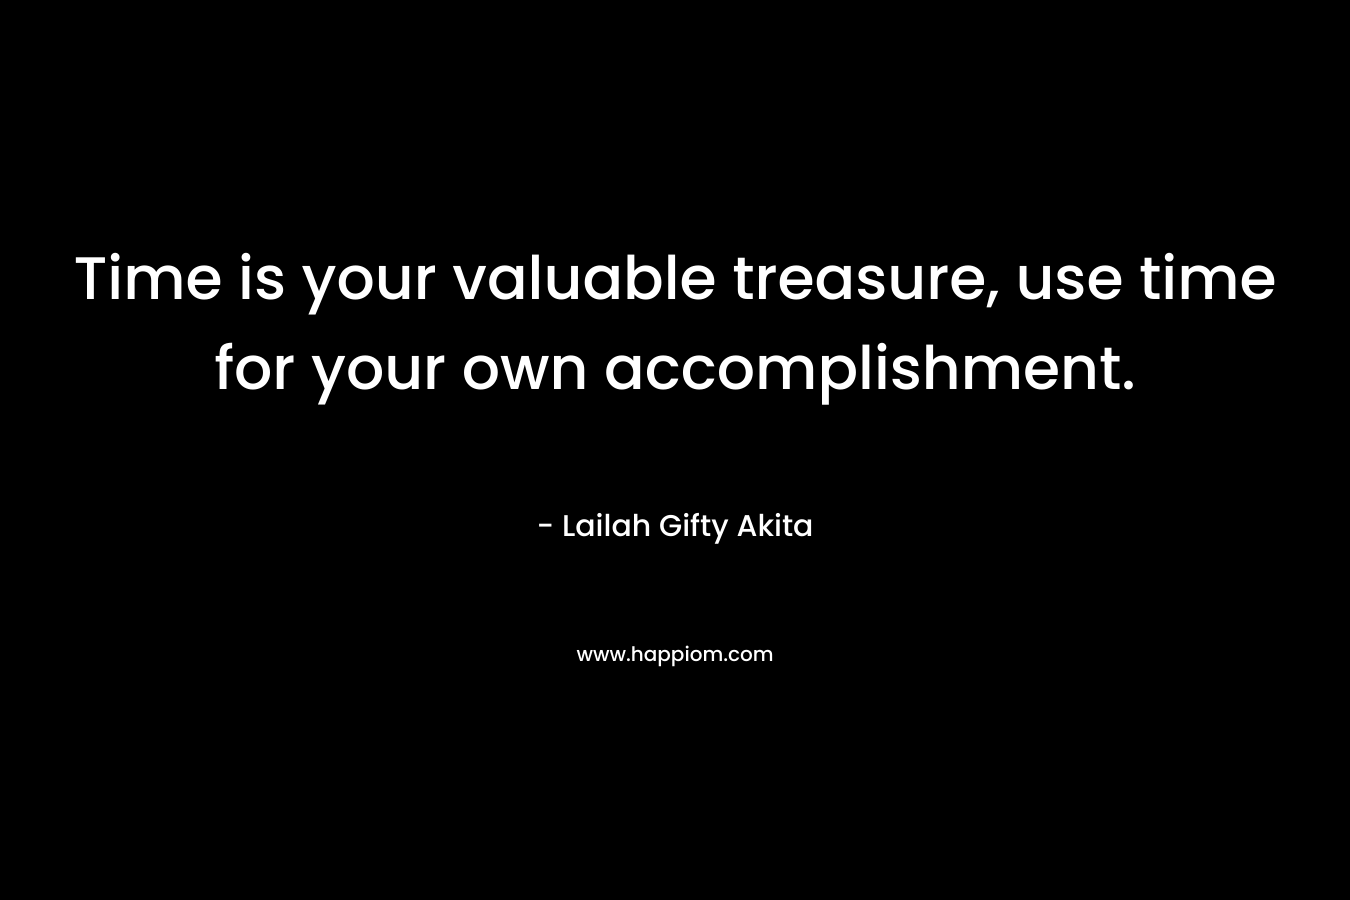 Time is your valuable treasure, use time for your own accomplishment.